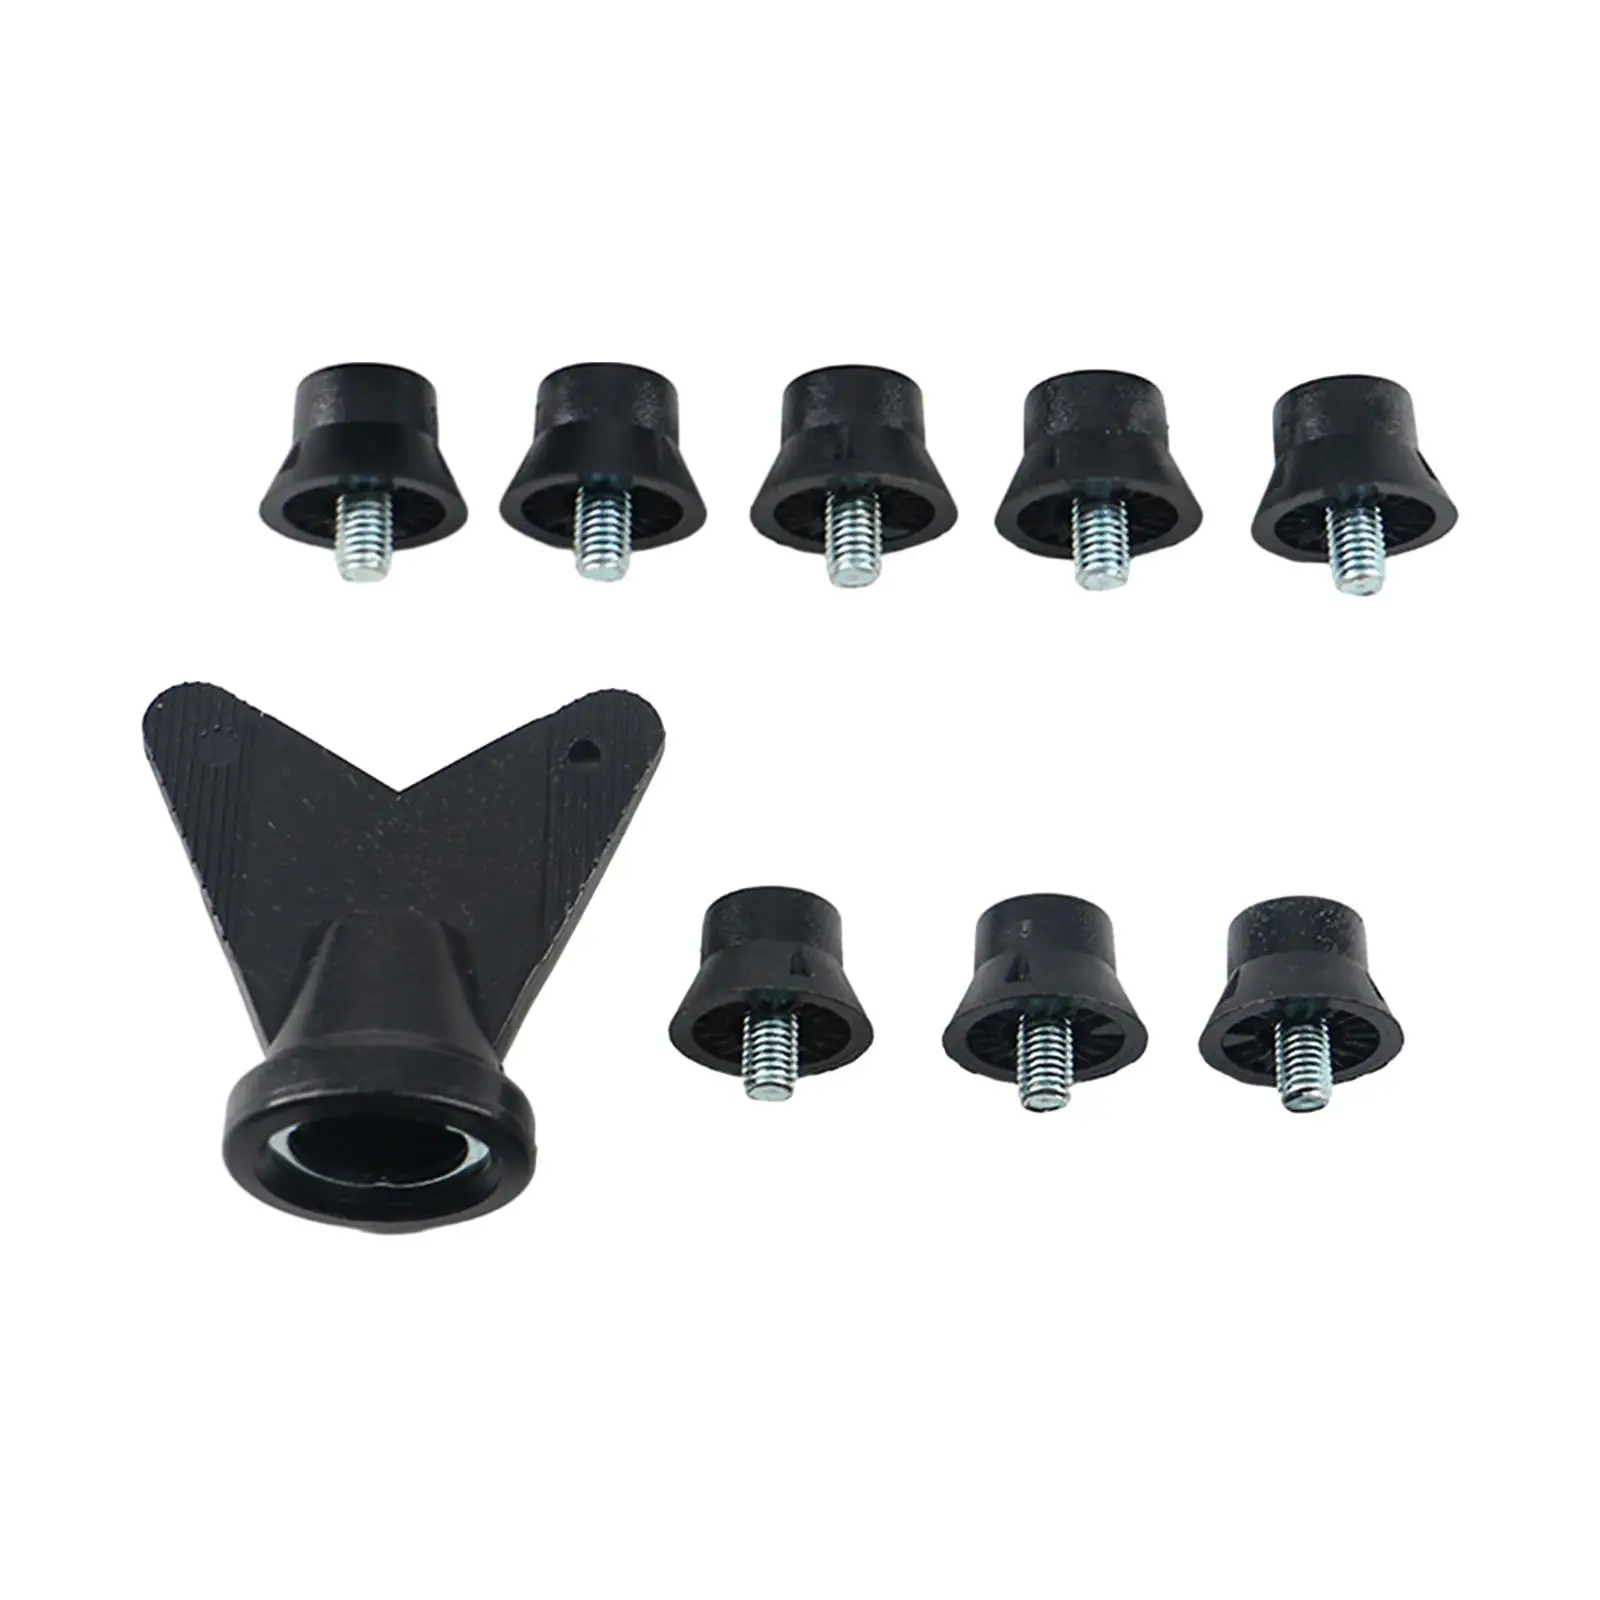 12Pcs Rugby Studs Portable Non Slip M5 Threaded Soccer Studs for Competition Indoor Outdoor Sports Athletic Sneakers Training